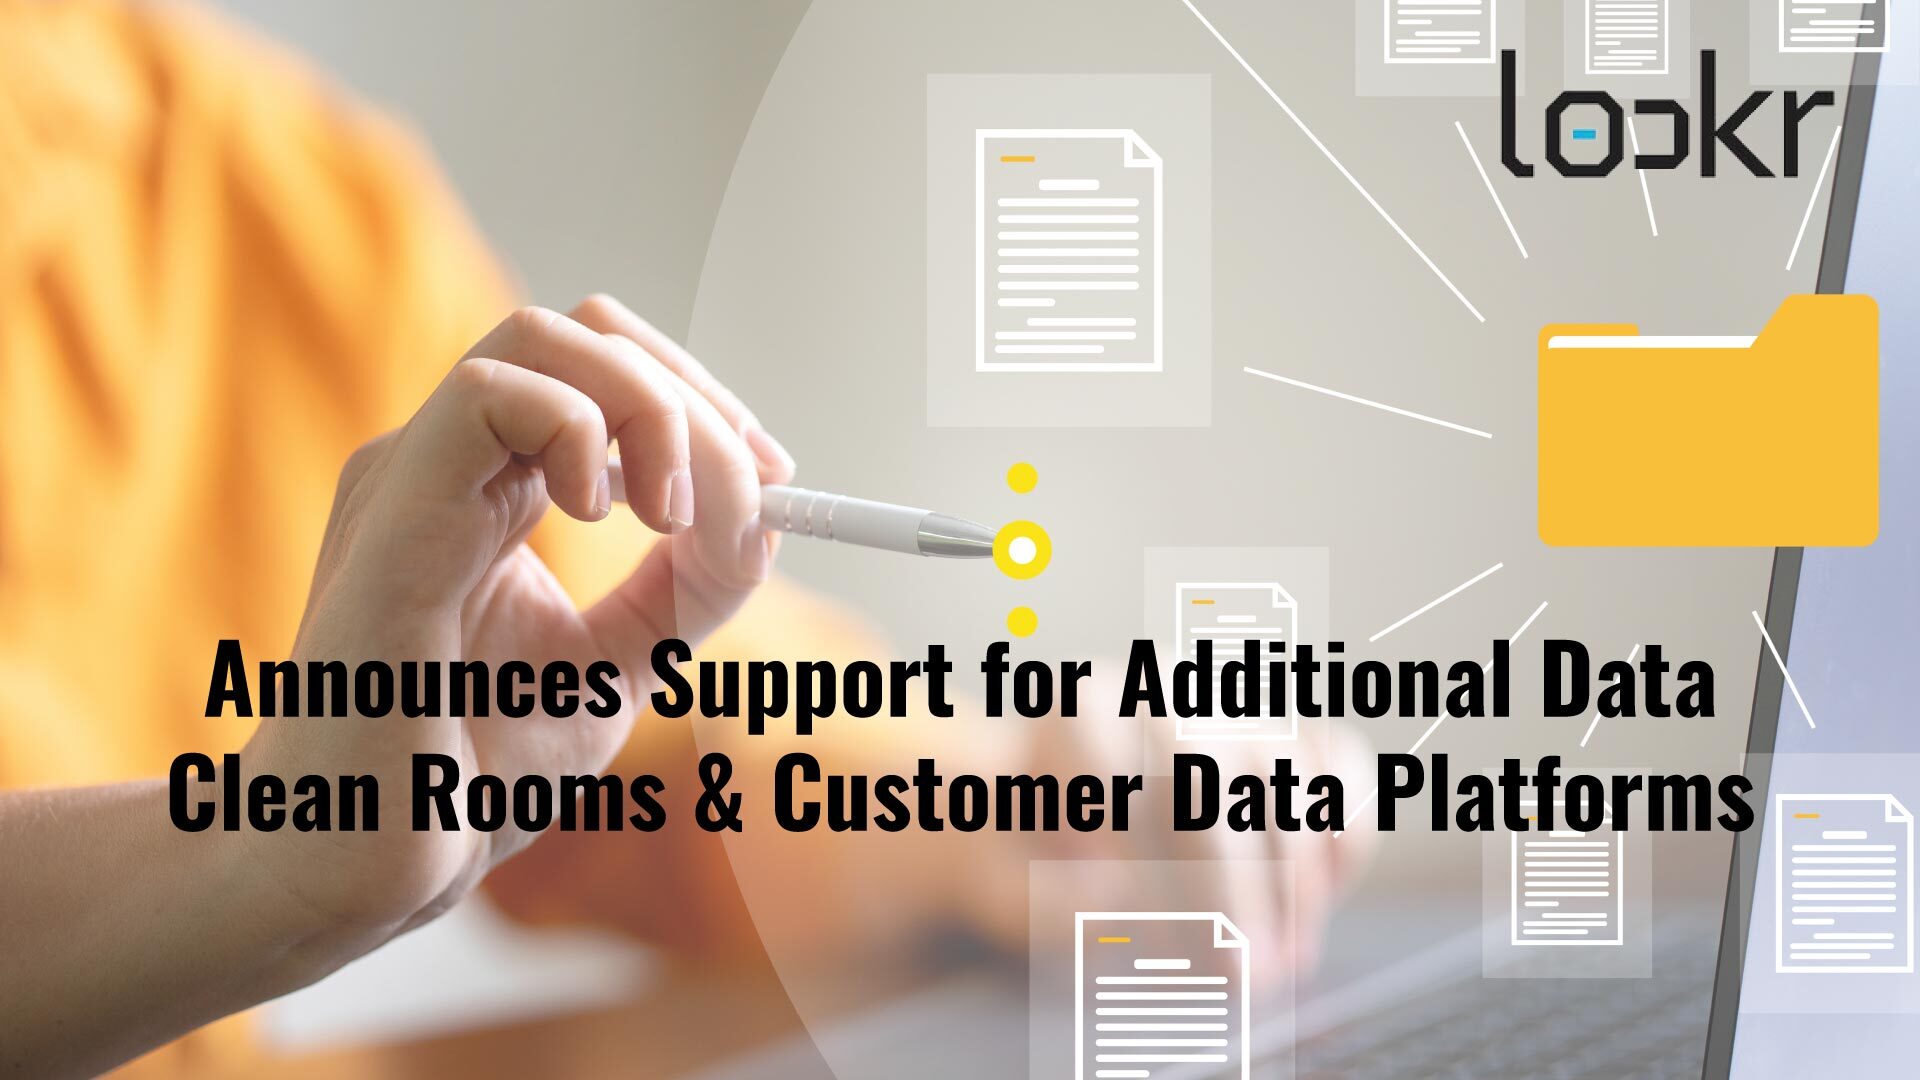 Identity lockr Announces Support for Additional Data Clean Rooms & Customer Data Platforms